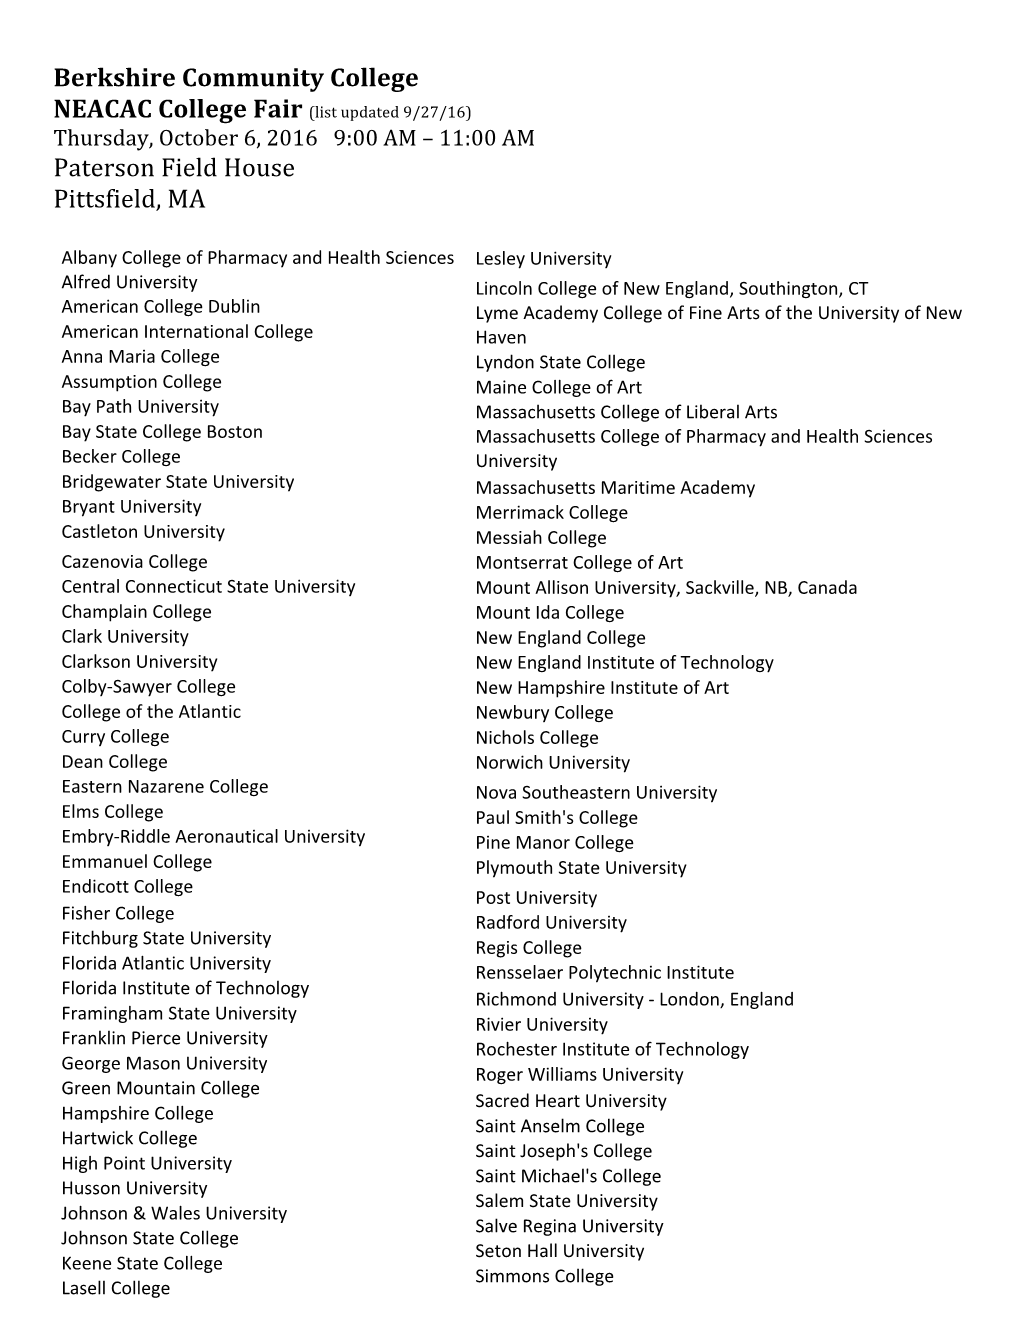 Berkshire Community College NEACAC College Fair (List Updated 9/27/16) Thursday, October 6, 2016 9:00 AM – 11:00 AM Paterson Field House Pittsfield, MA